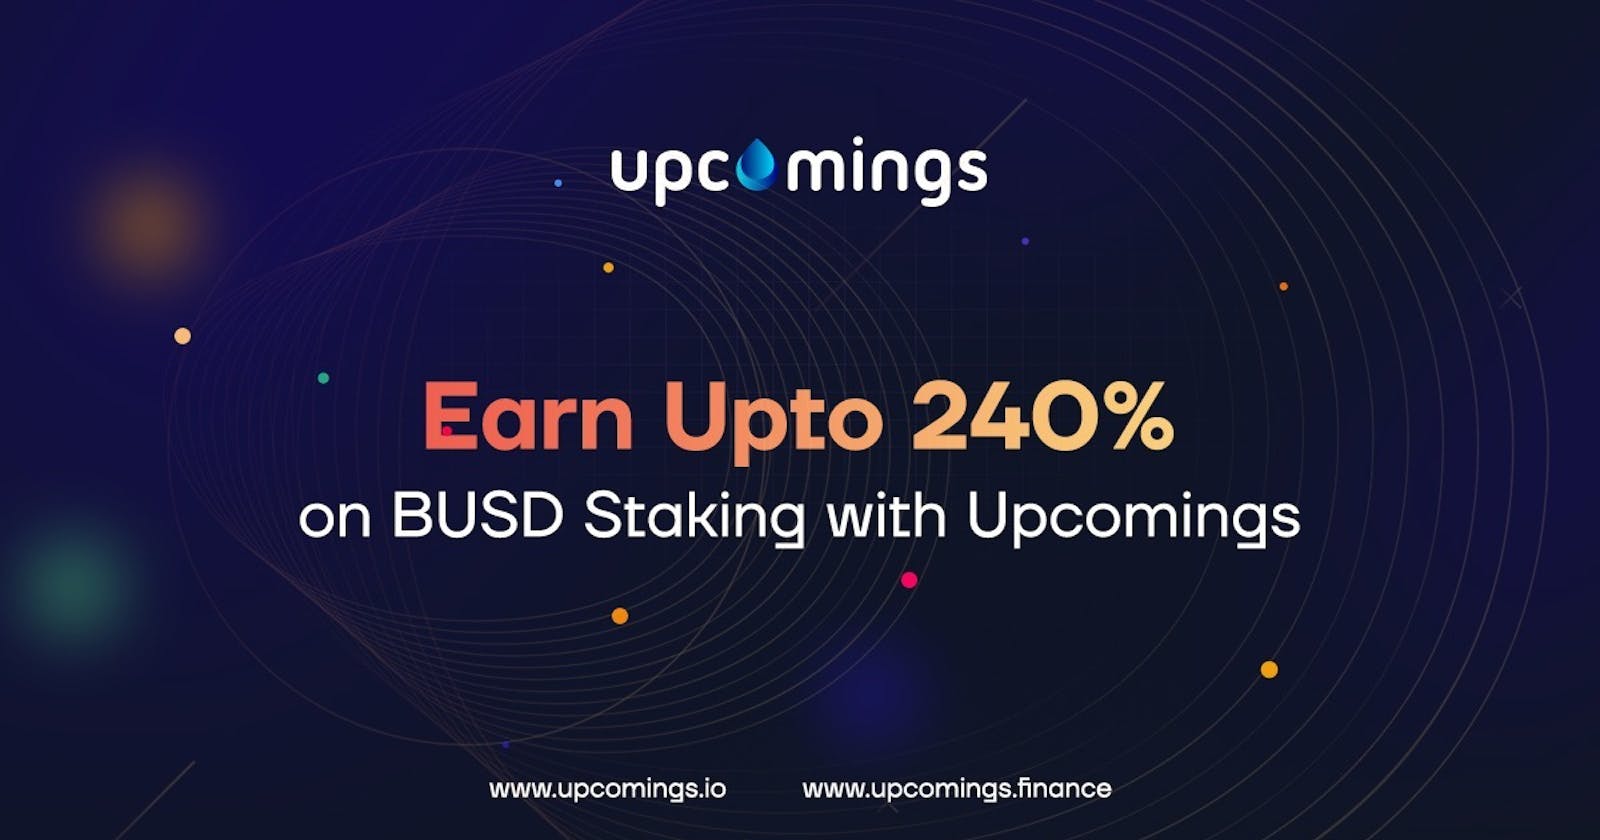 Exciting News #UpcomingsDAO #Staking Is Live!